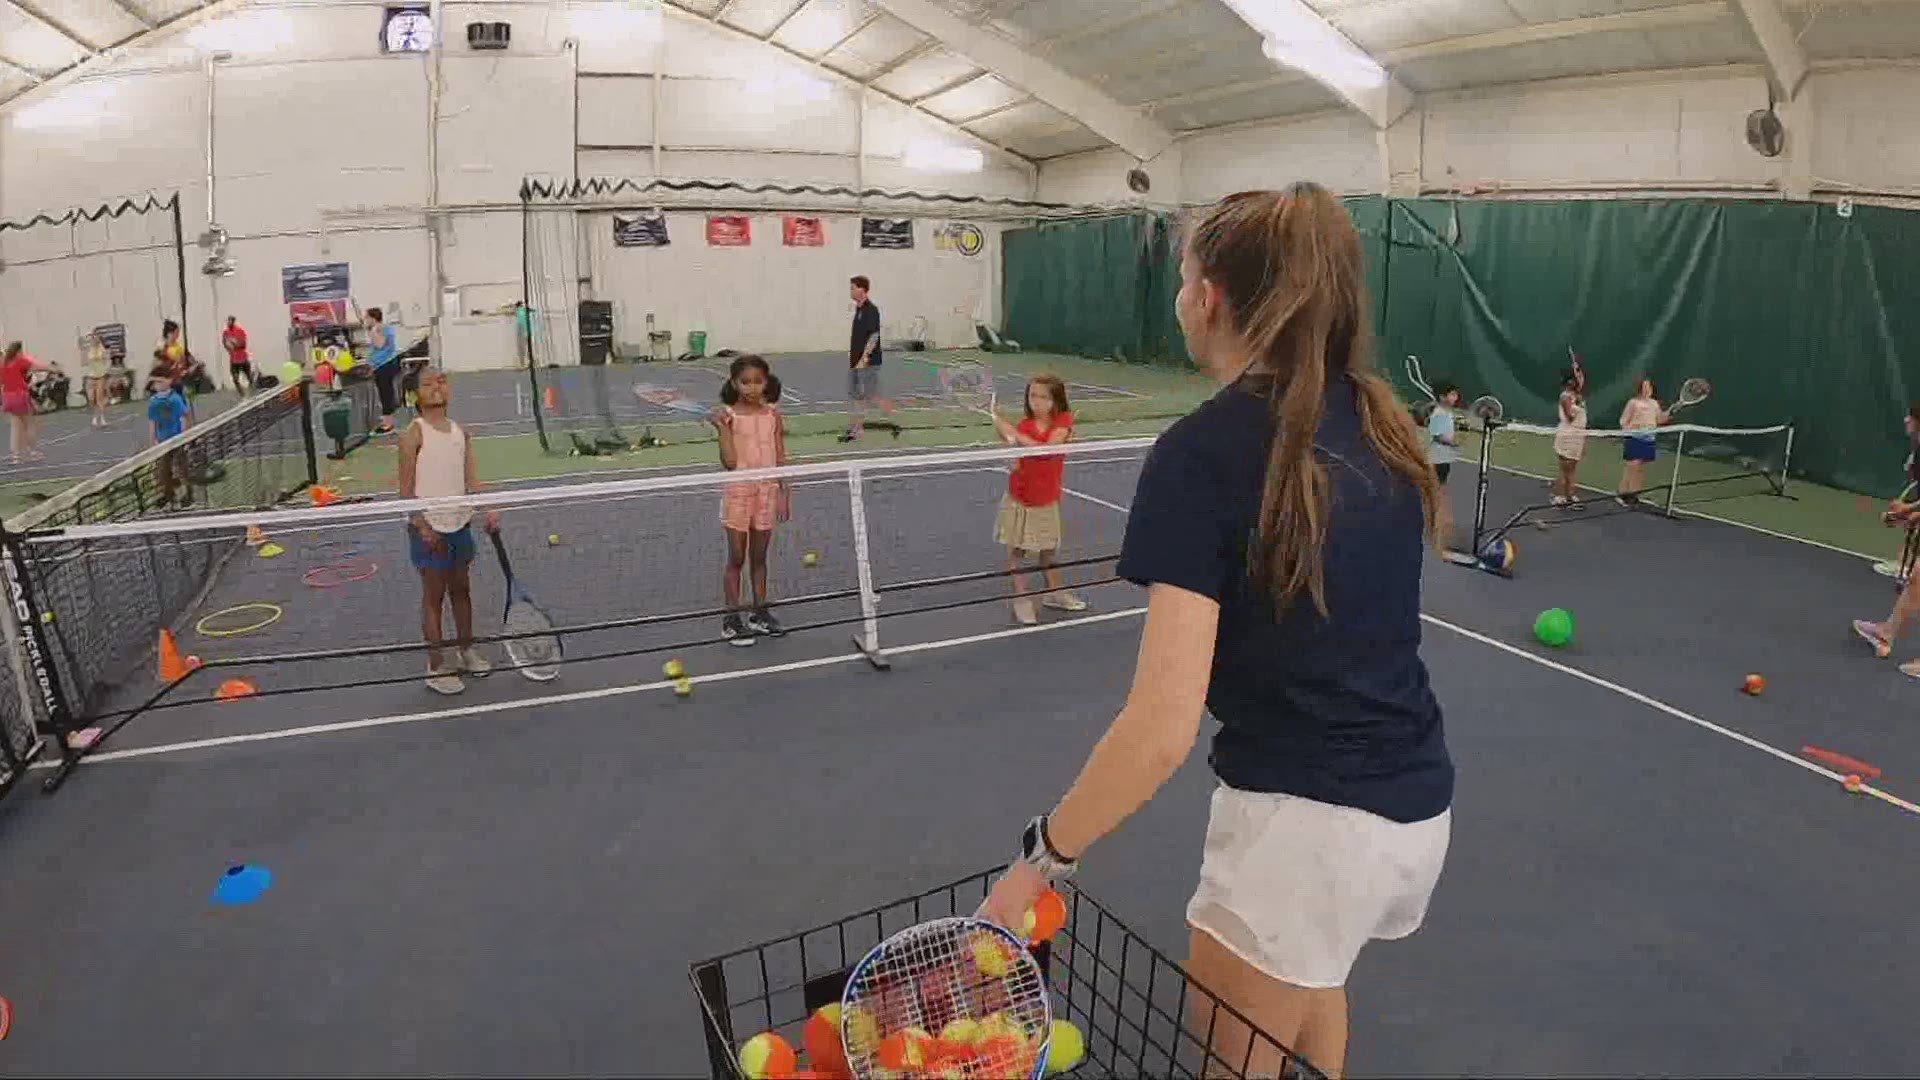 Play Tennis Midwest taught some grateful kids how to play tennis today! A spokesperson for the group said the event was centered around fun and learning!